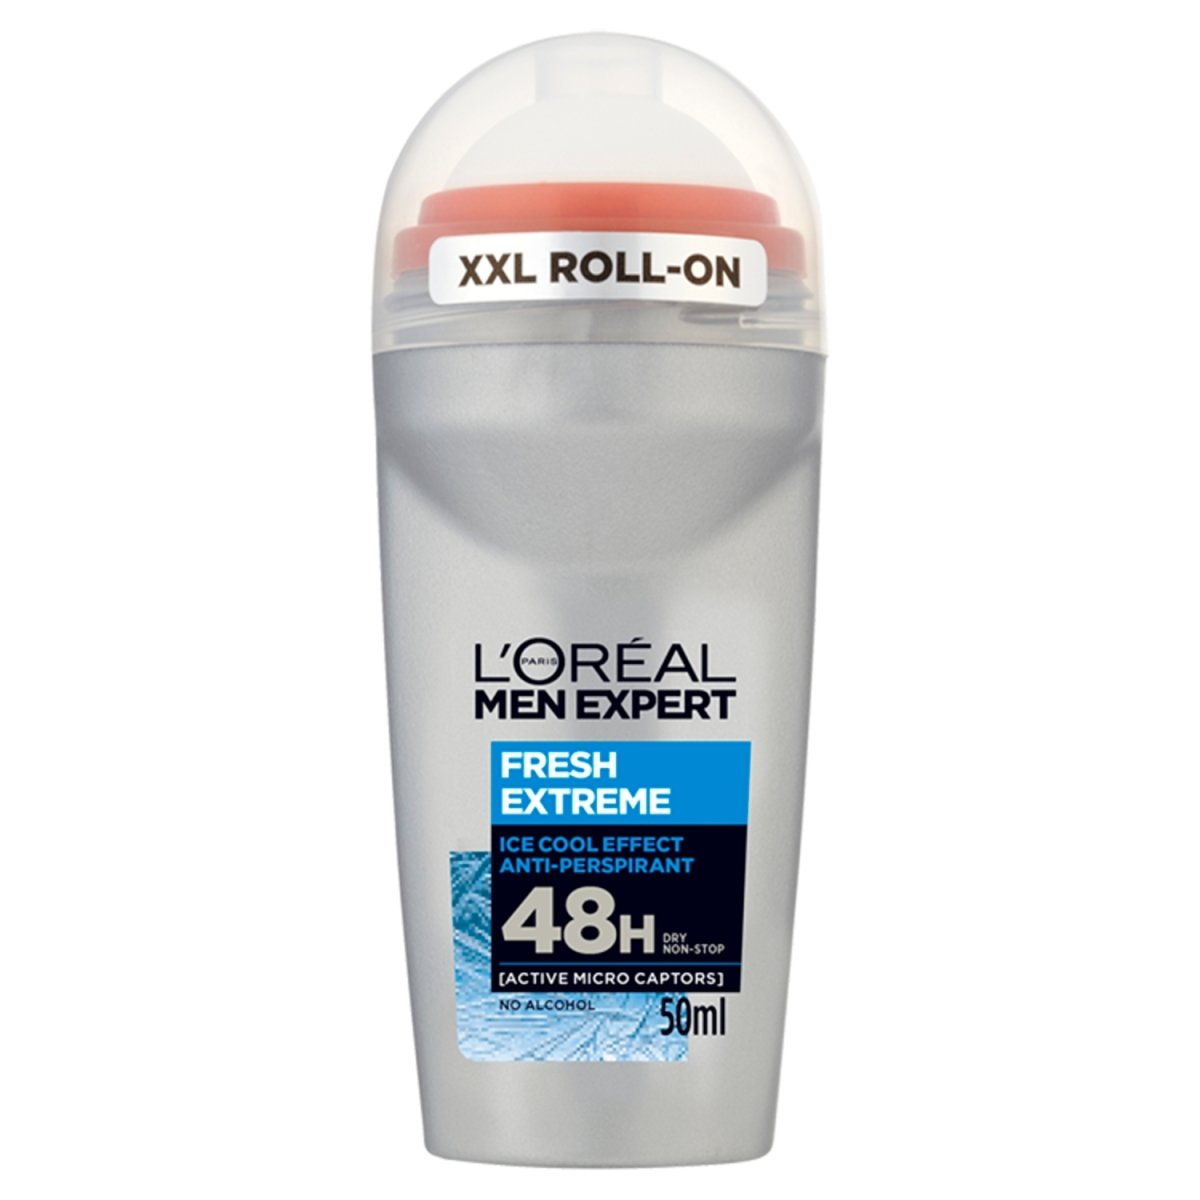 L'Oreal Men Expert Roll on Fresh Extreme - Intamarque 3600521848289